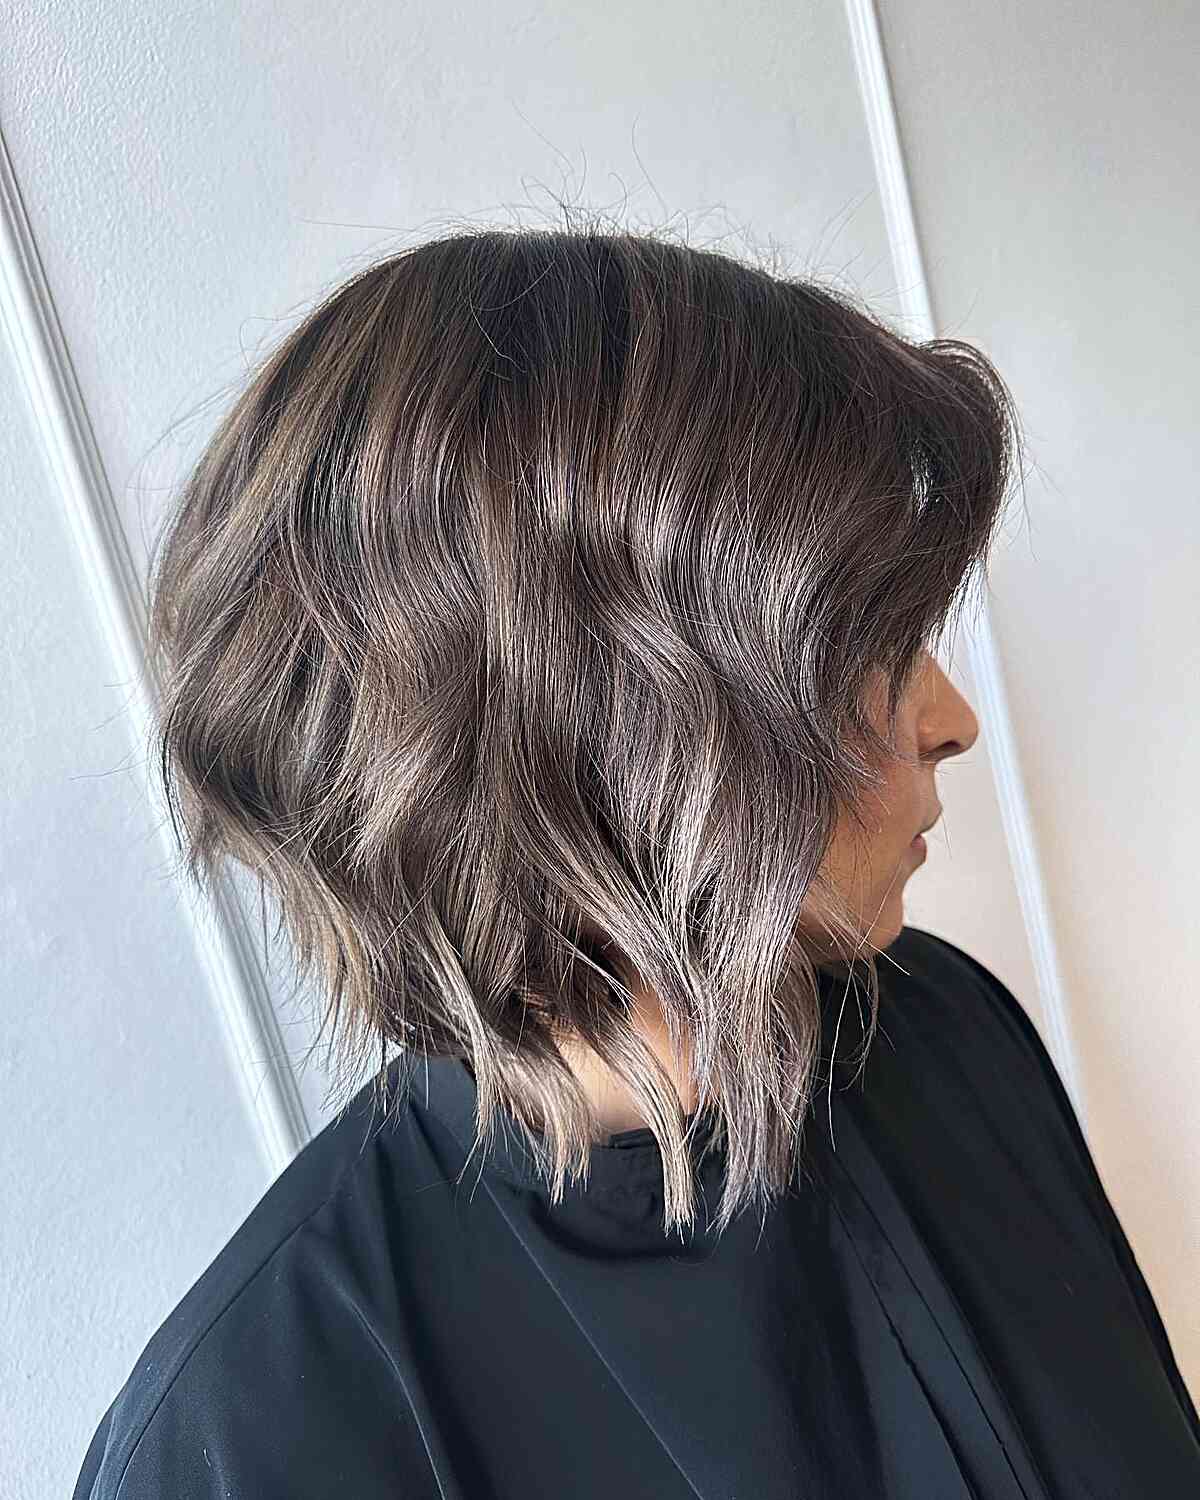 36 Short Layered Hairstyles to Try: From Bold to Subtle - Hood MWR